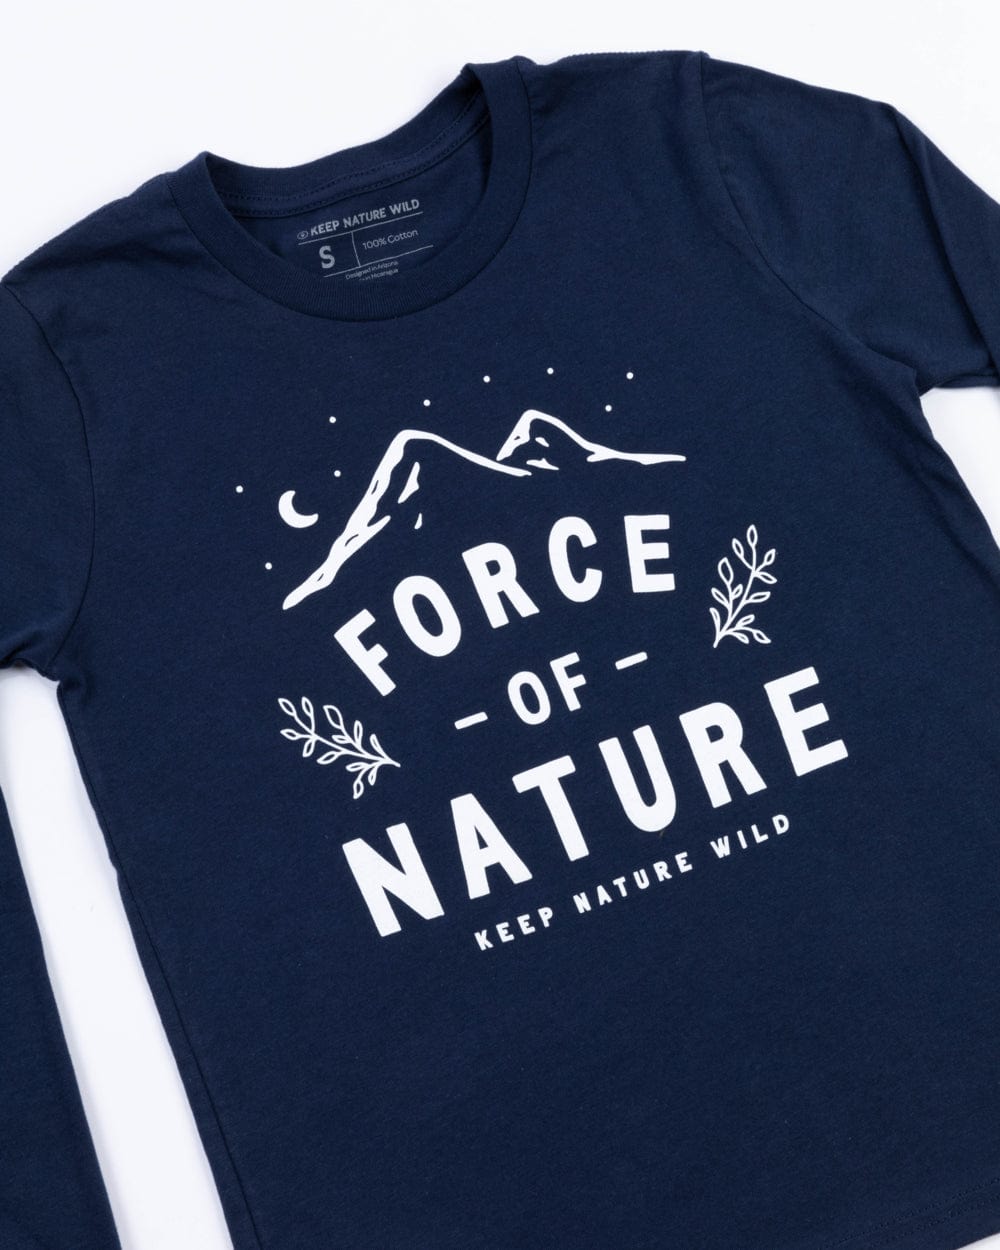 Keep Nature Wild Kids Force of Nature Youth Long Sleeve | Navy